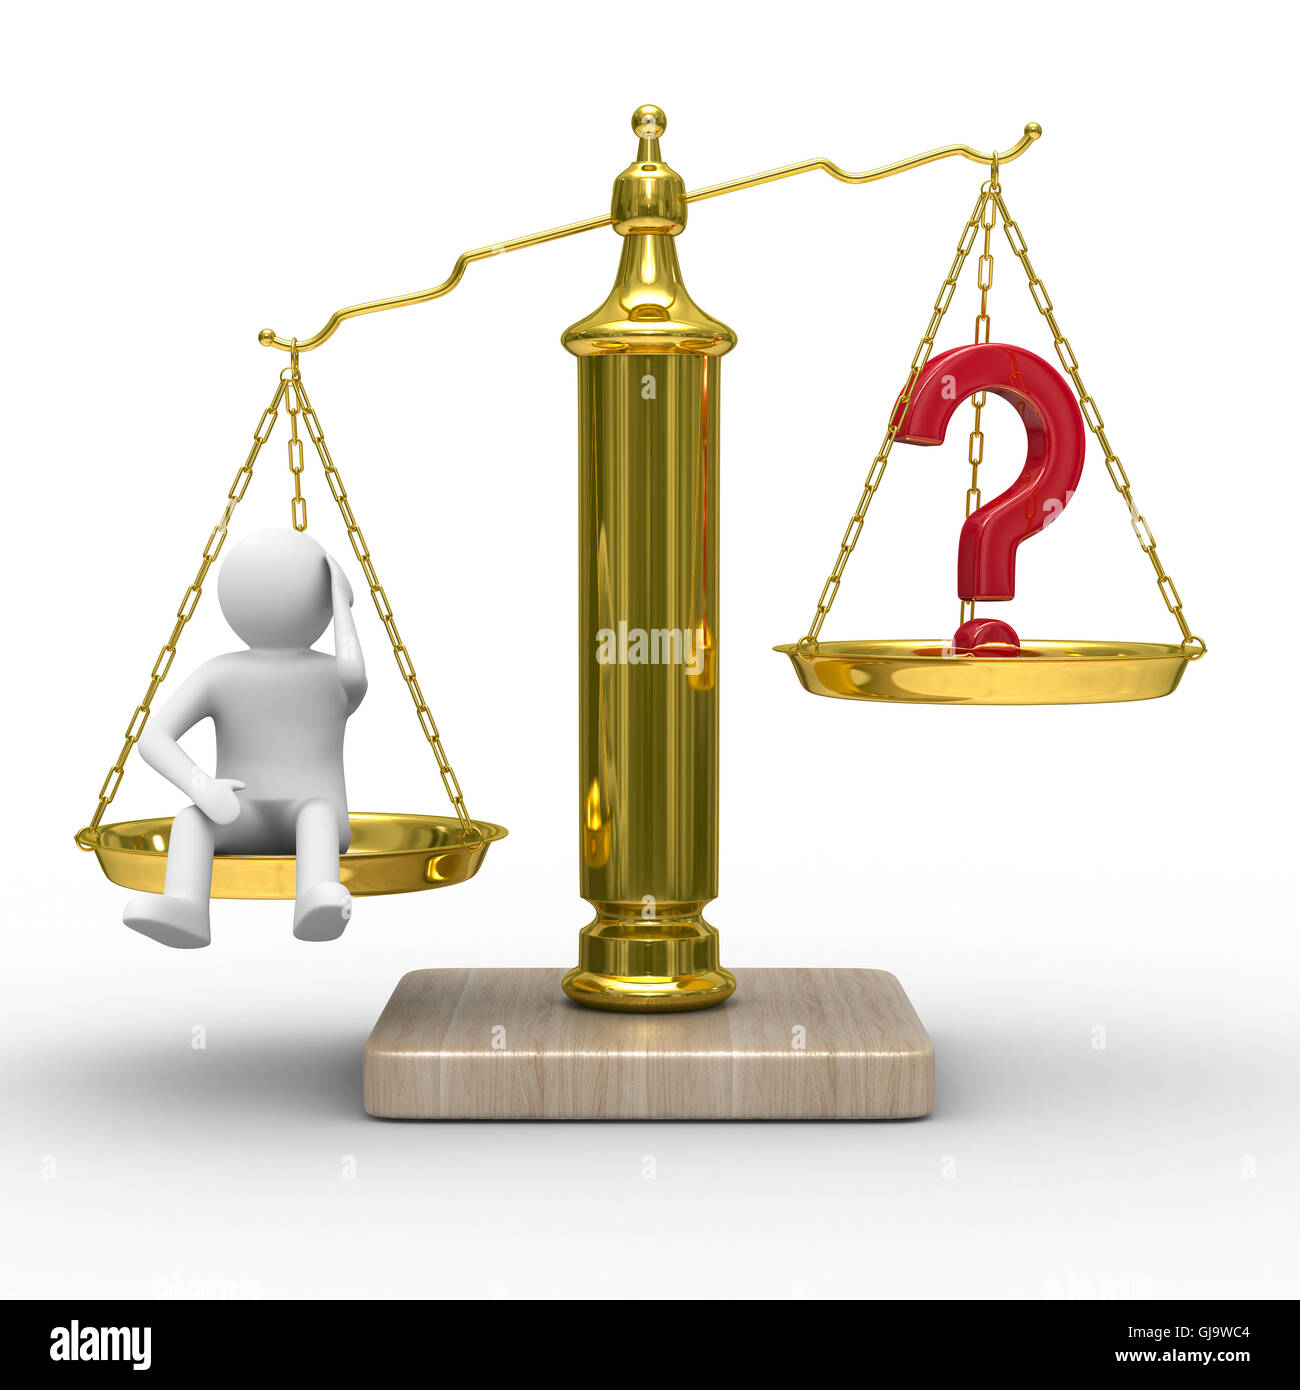 man and question on scales. Isolated 3D image Stock Photo